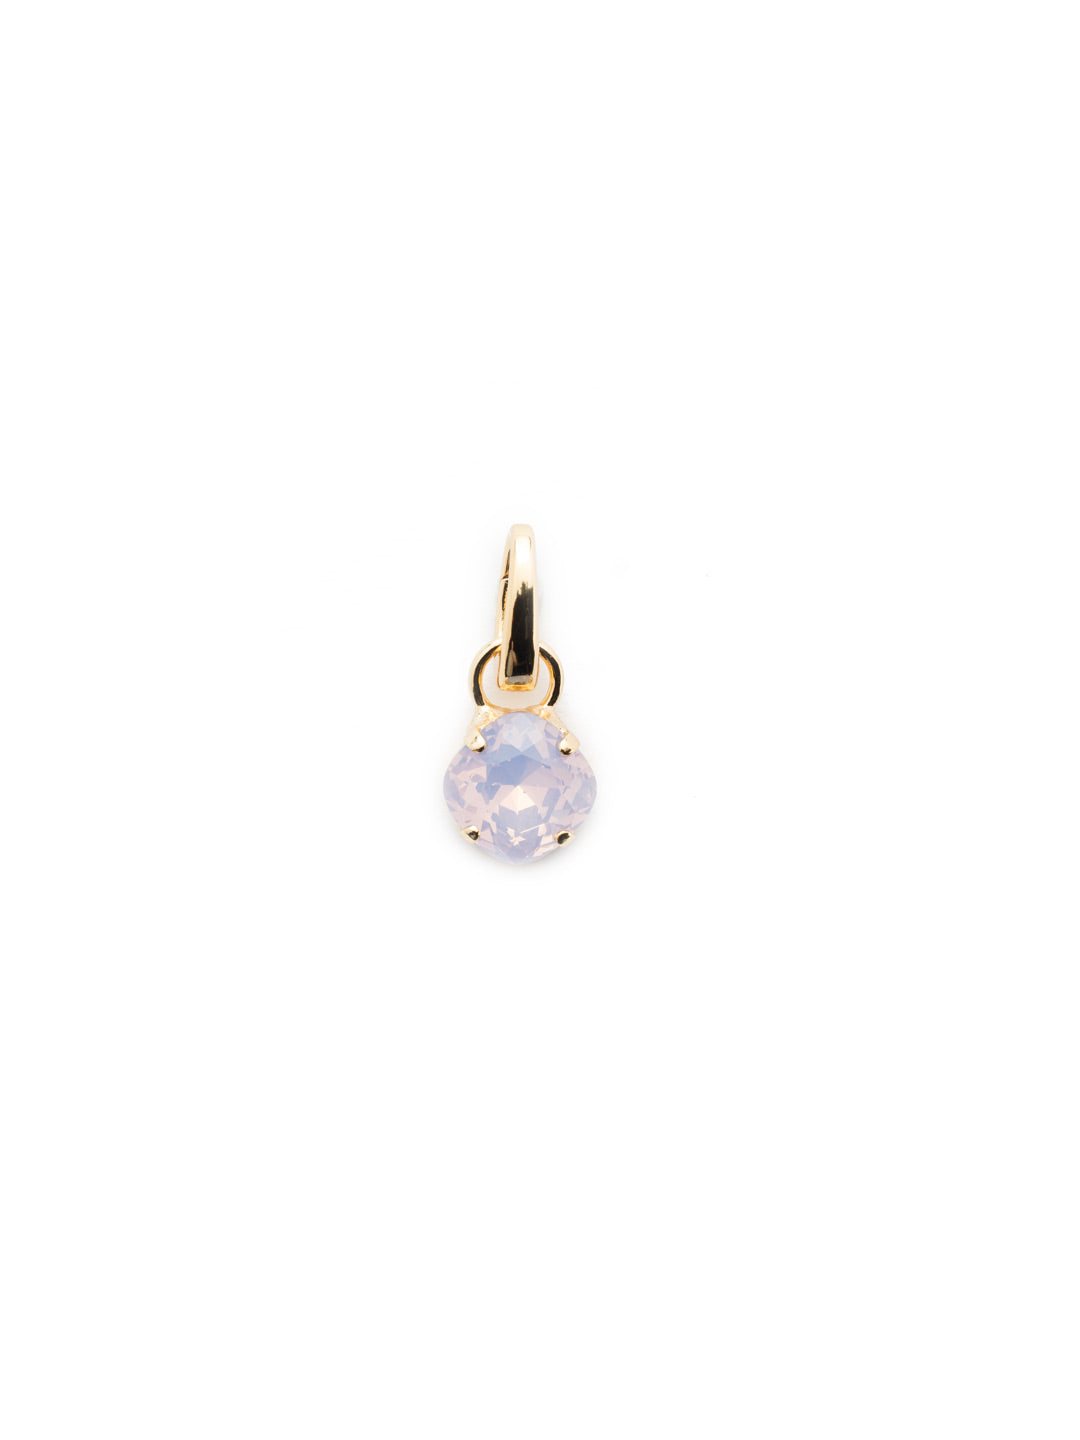 October Birthstone Rosewater Charm - CEU1BGROW - <p>A cushion-cut crystal designed in your beautiful birthstone. Simply attach it to our favorite chain for an everyday look. From Sorrelli's Rose Water collection in our Bright Gold-tone finish.</p>